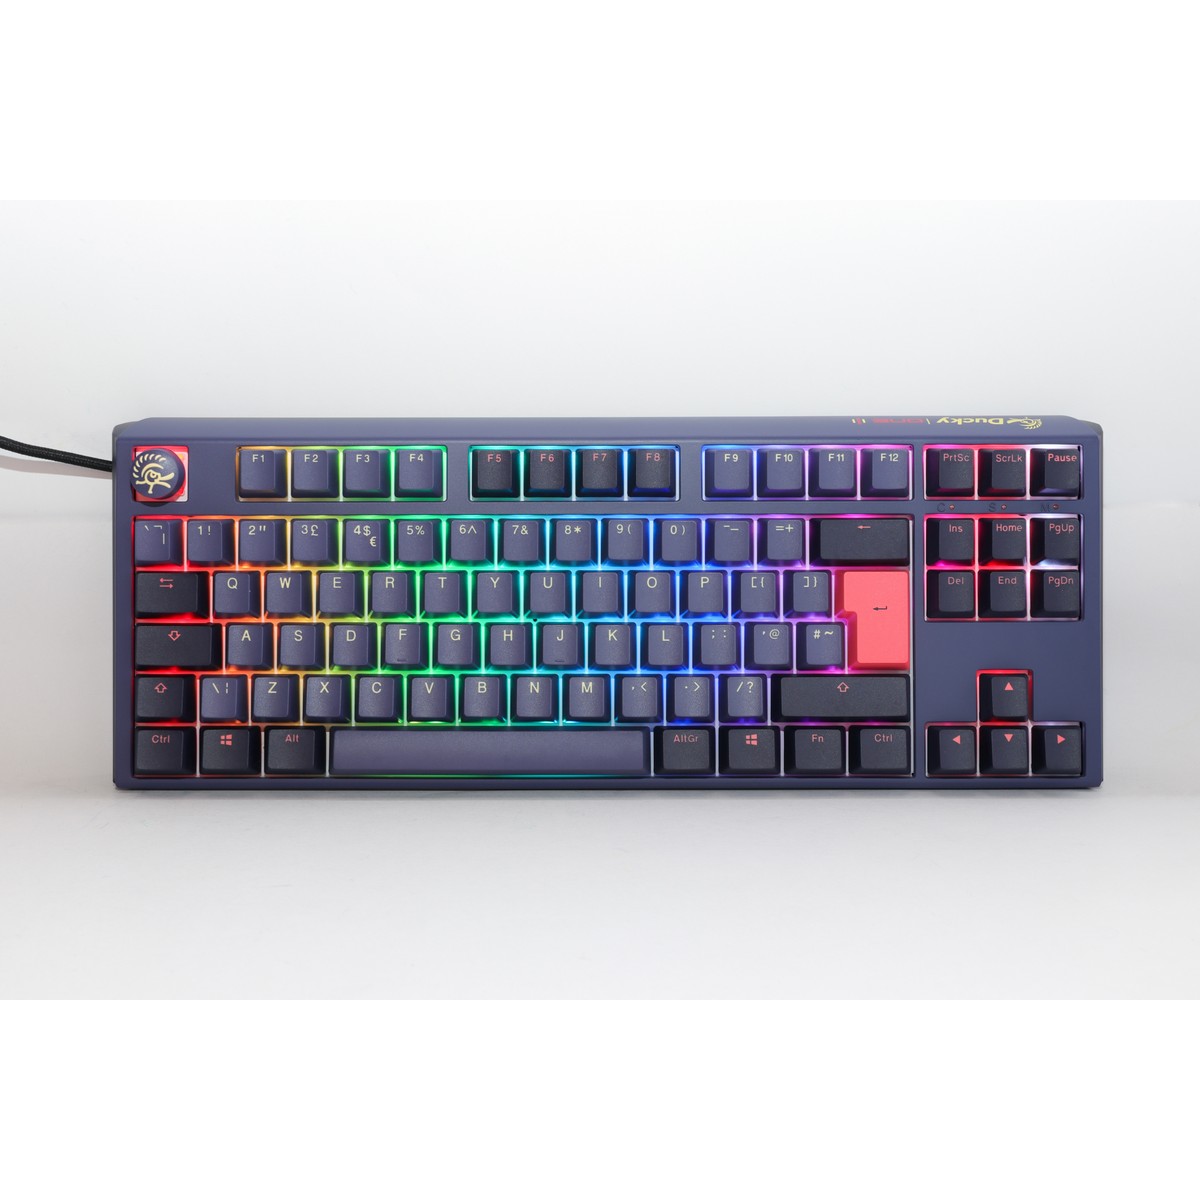 Ducky One 3 Cosmic SF 65% USB RGB Mechanical Gaming Keyboard Cherry MX Brown Switch - UK Layout